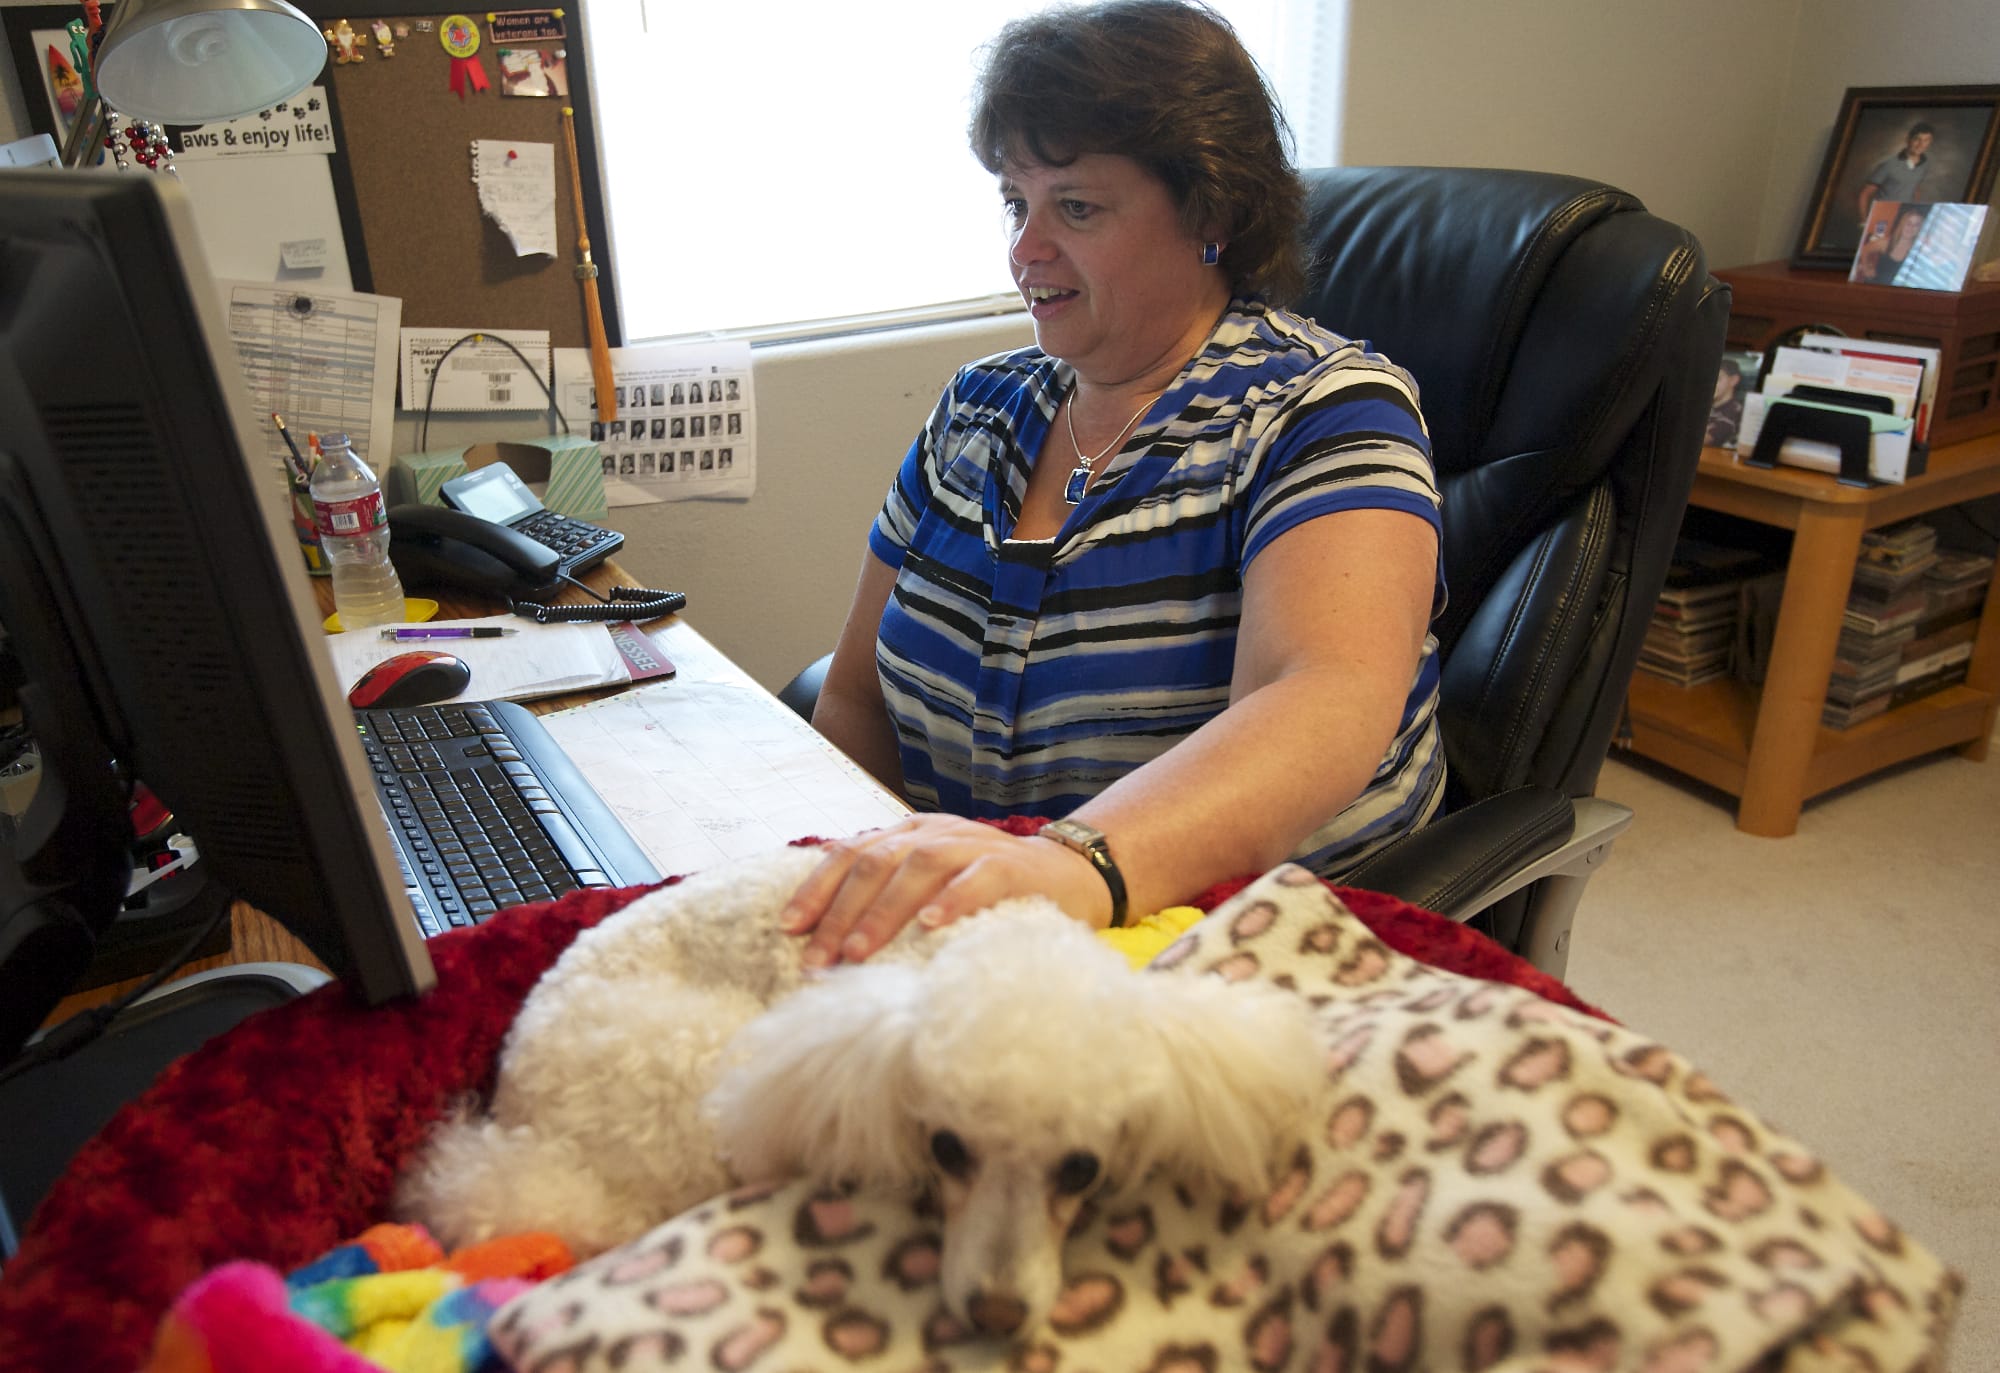 Tami Marshall has her dog Jazzy to keep her company during her workday at home. Marhsall is a medical coding specialist for Vancouver-based PeaceHealth, which allows its coders to work from home.